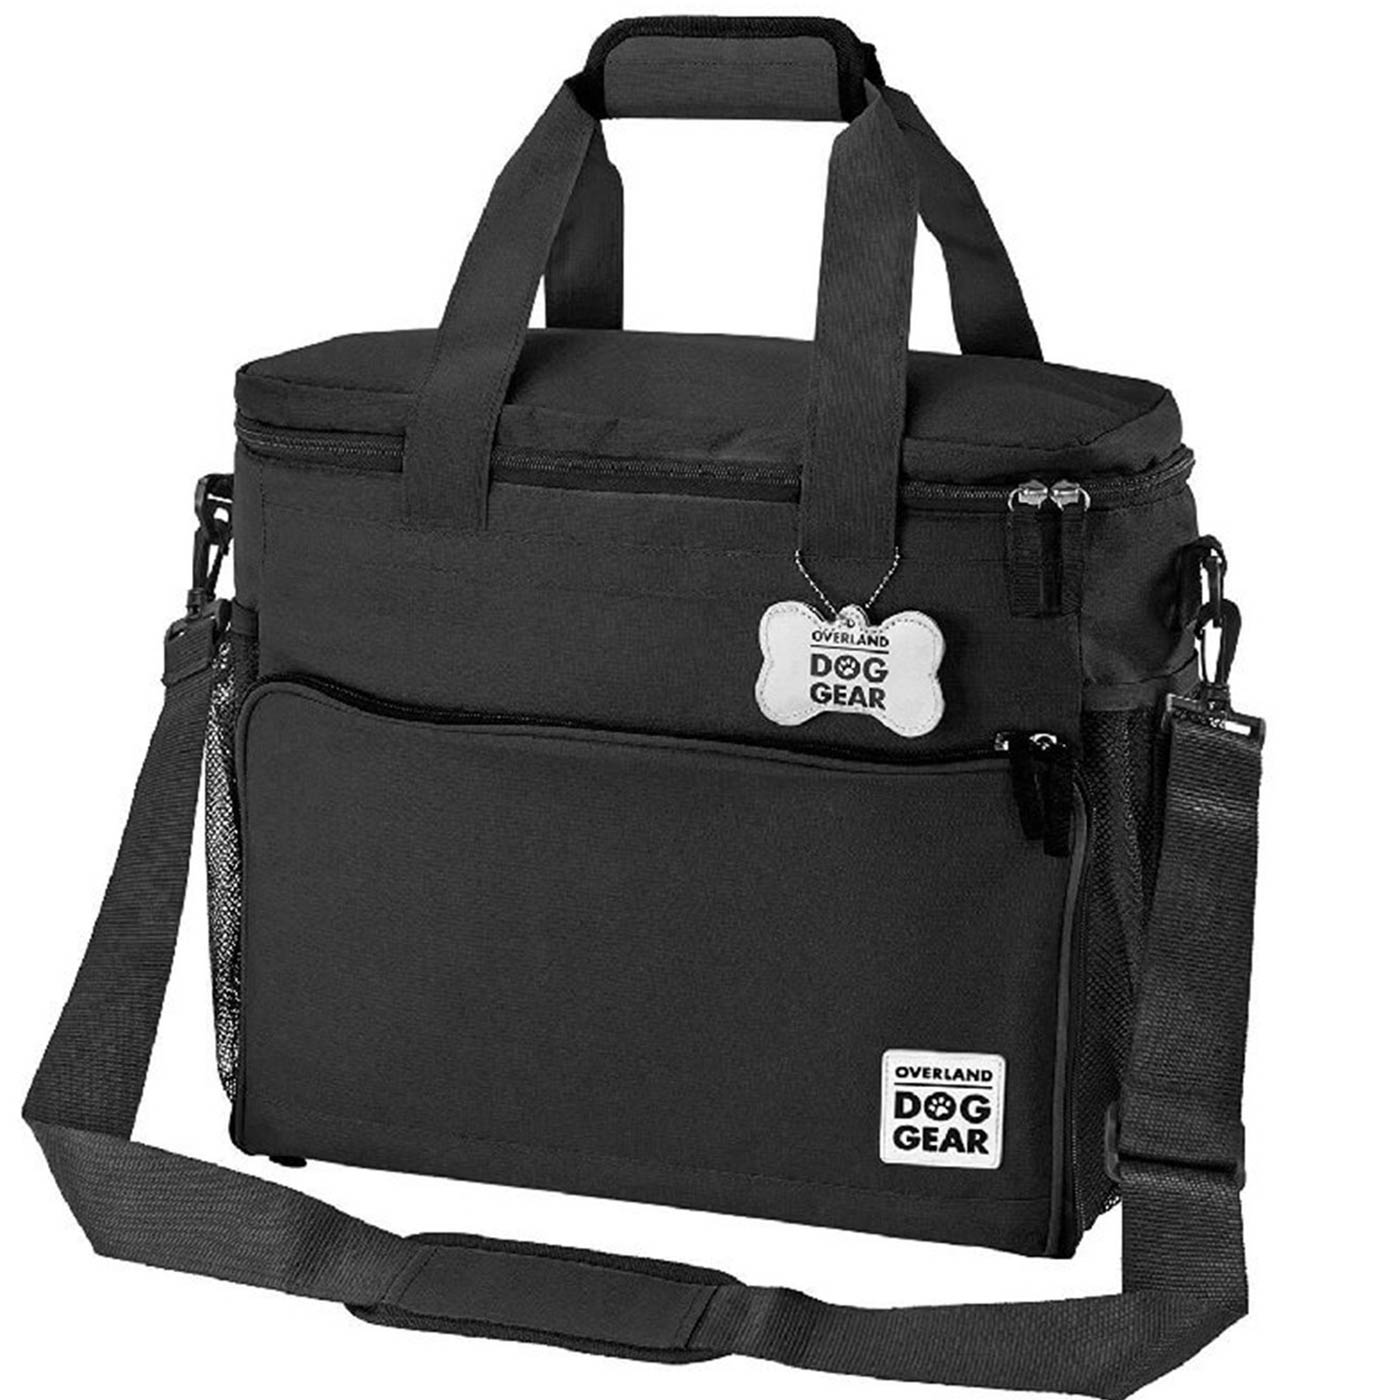 Discover, Mobile Dog Gear Week Away Bag, in Black. The Perfect Away Bag for any Pet Parent, Featuring dividers to stack food and built in waste bag dispenser. Also Included feeding set, collapsible silicone bowls and placemat! The Perfect Gift For travel, meets airline requirements. Available Now at Lords & Labradors US